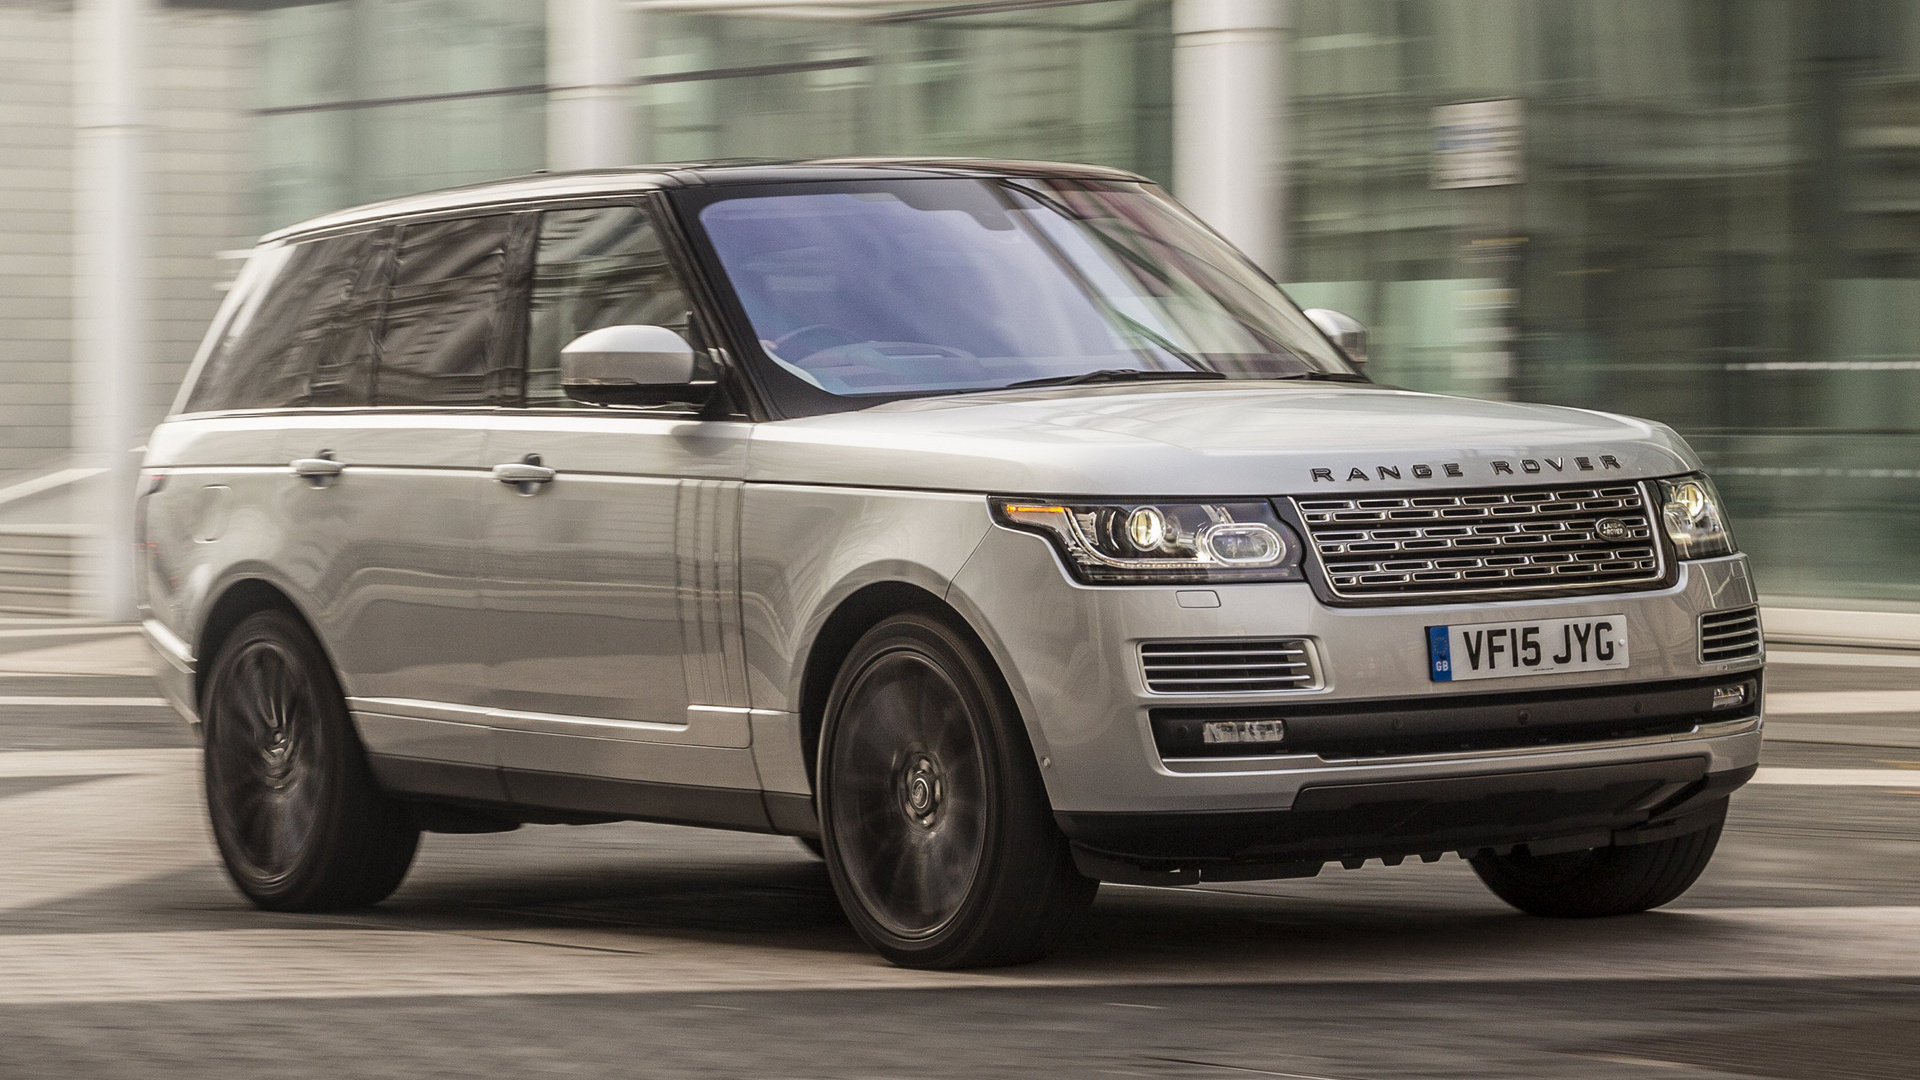 2015 Range Rover SVAutobiography (UK) - Wallpapers and HD Images | Car ...